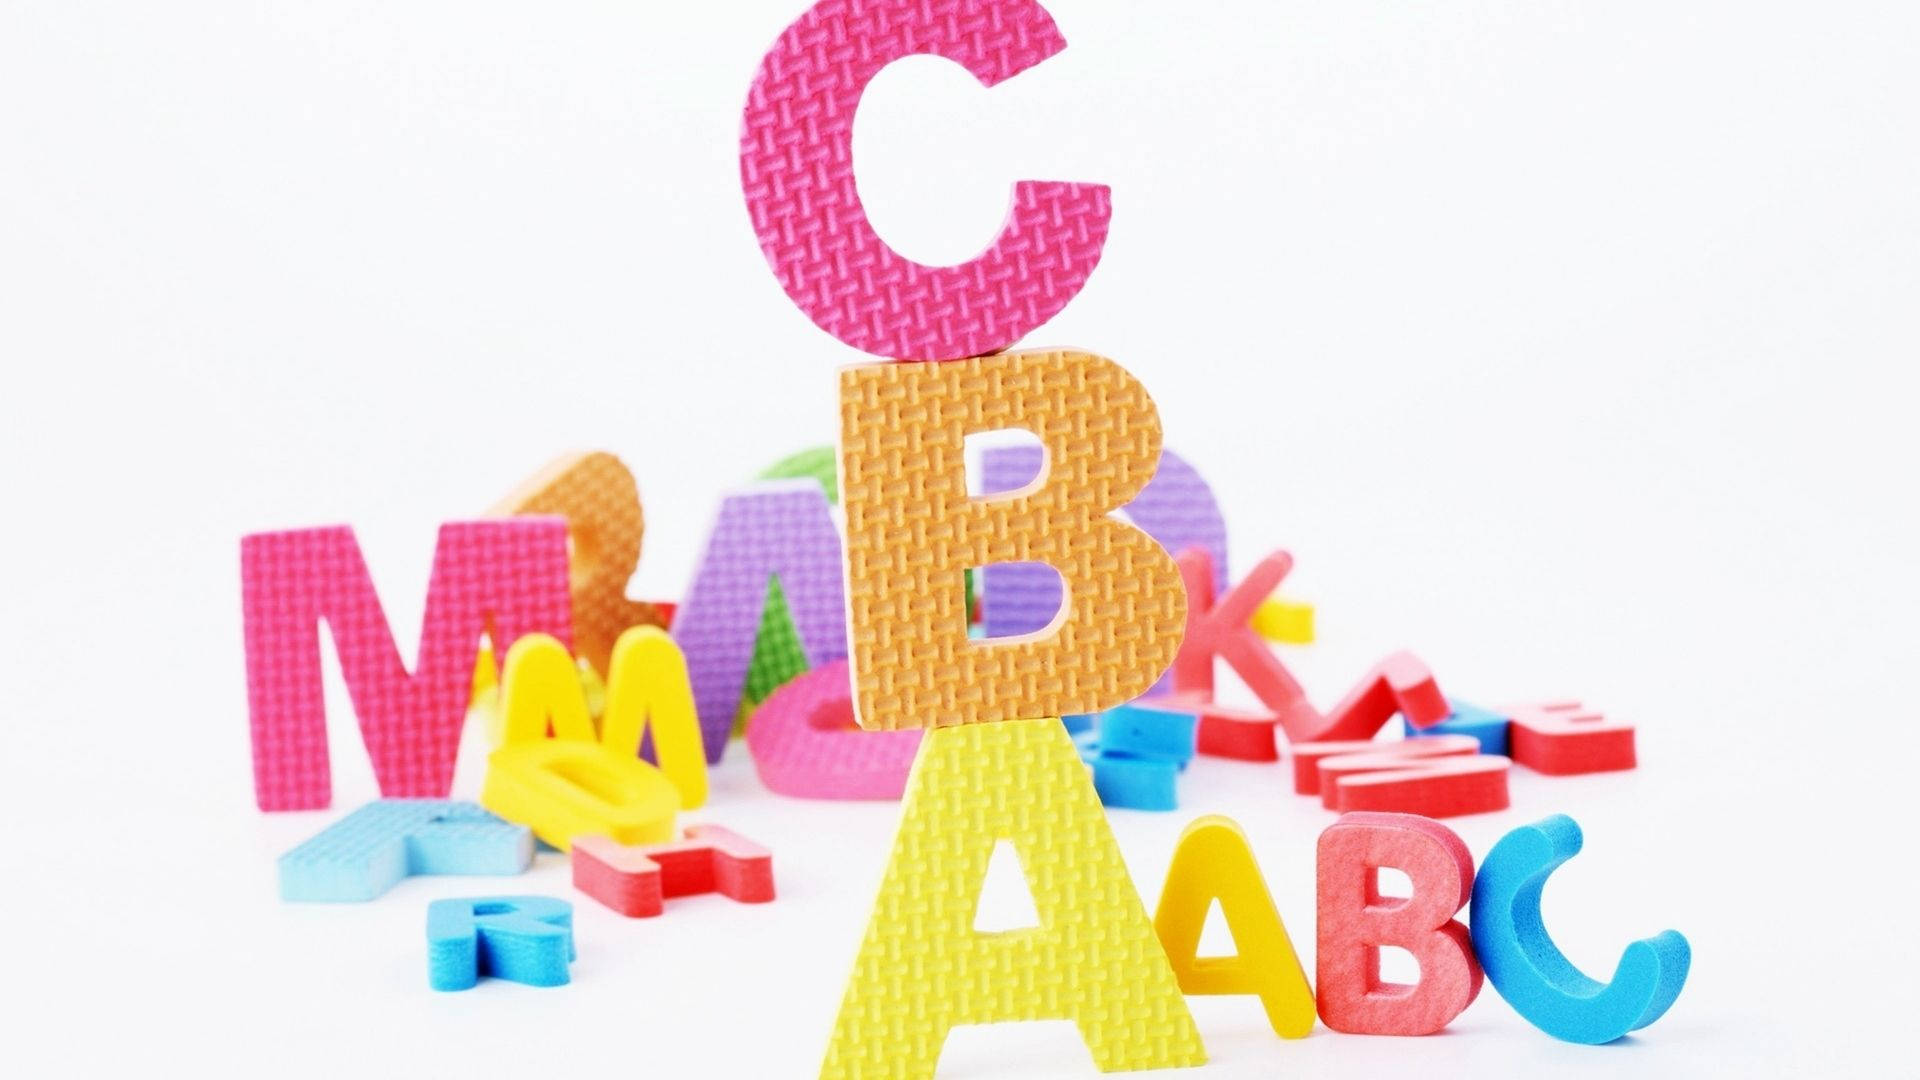 Stacked Rubber Alphabets Picture